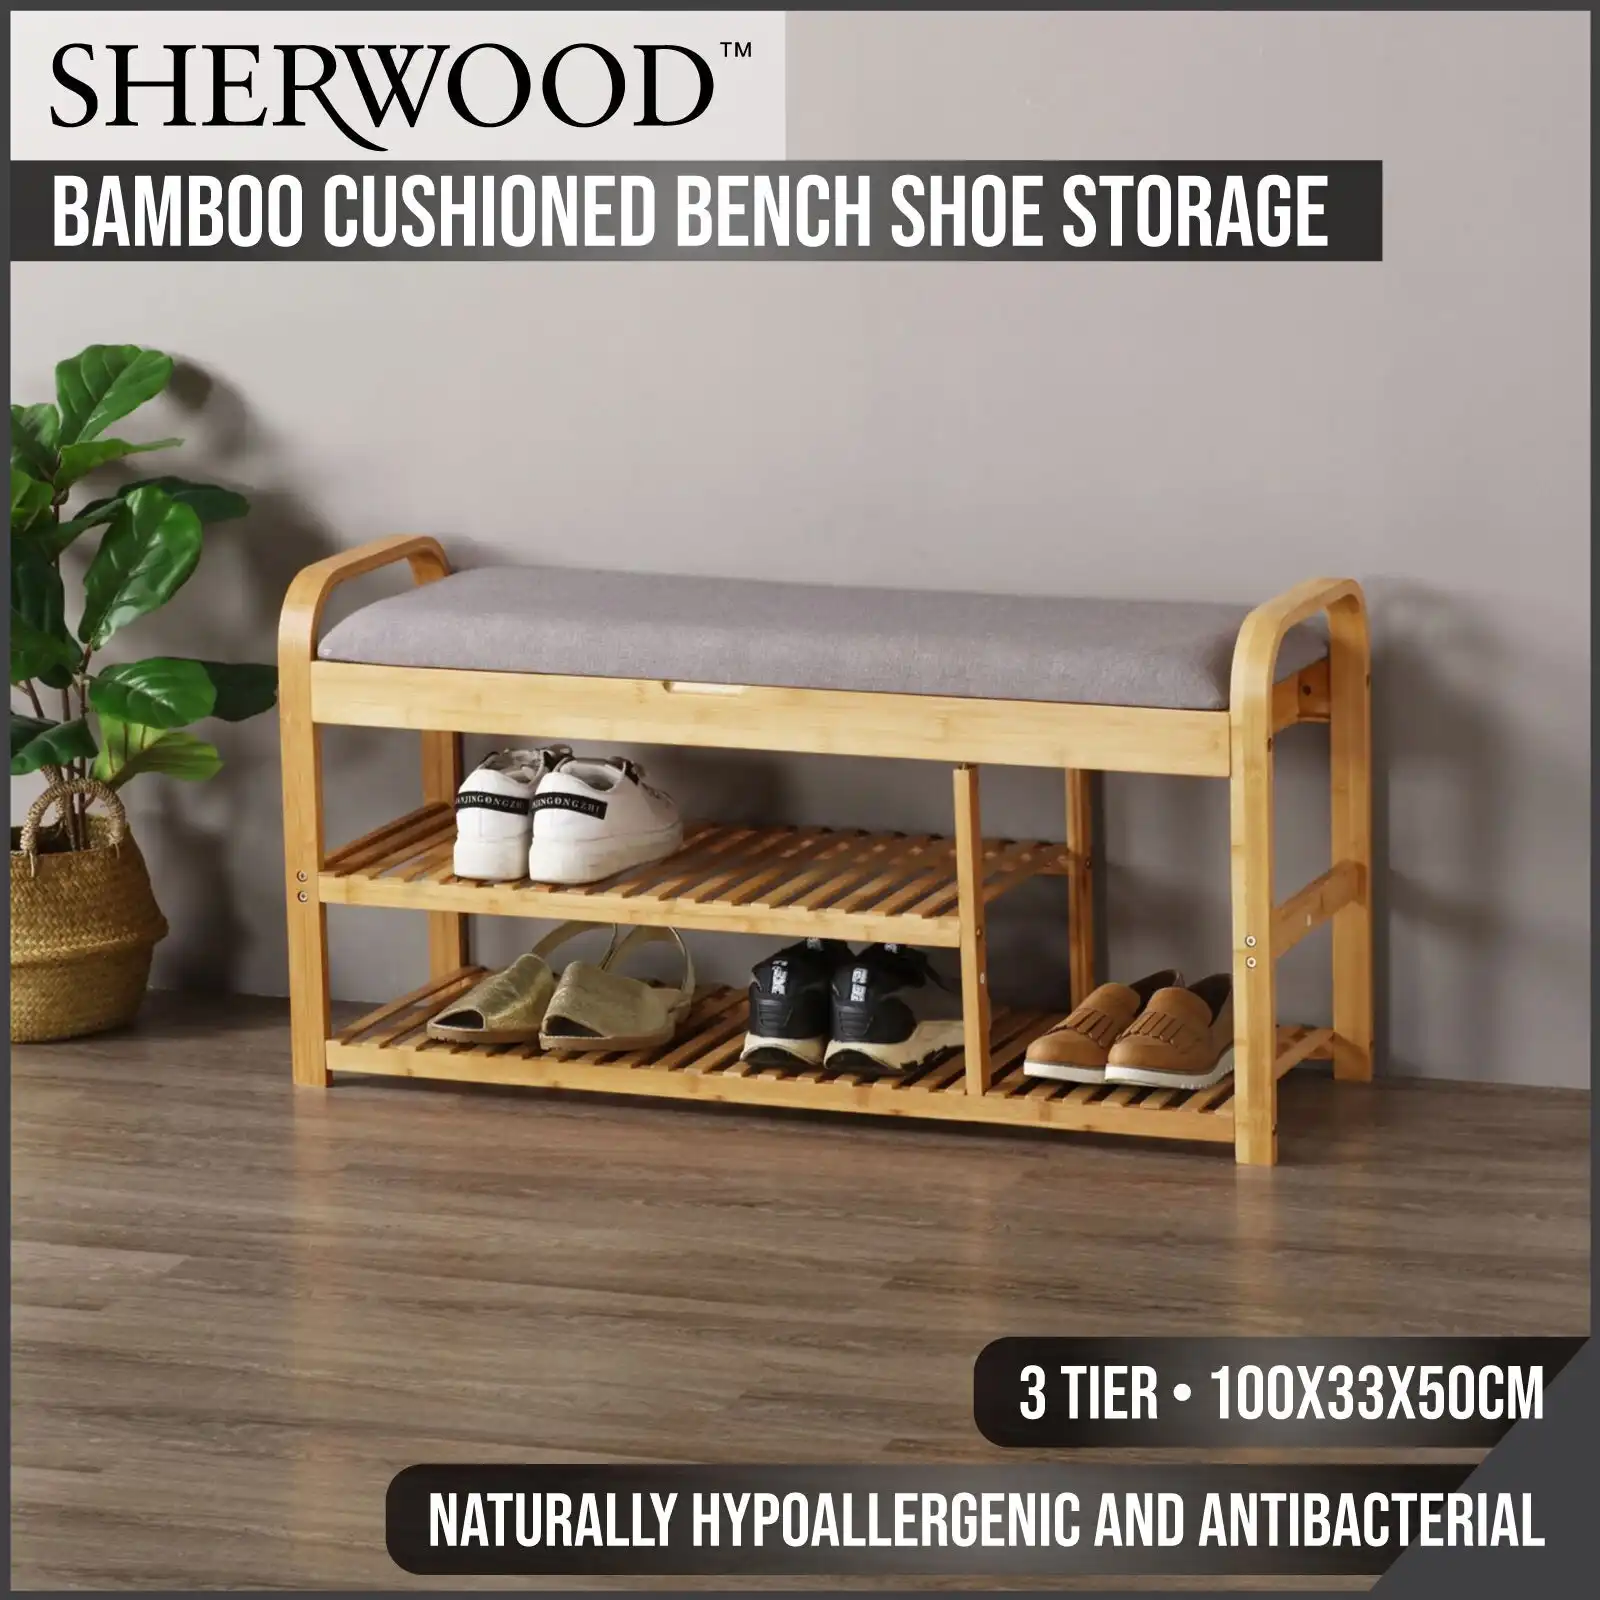 Sherwood Home Bamboo Cushioned Bench Shoe Storage 3 tier with Storage Compartment